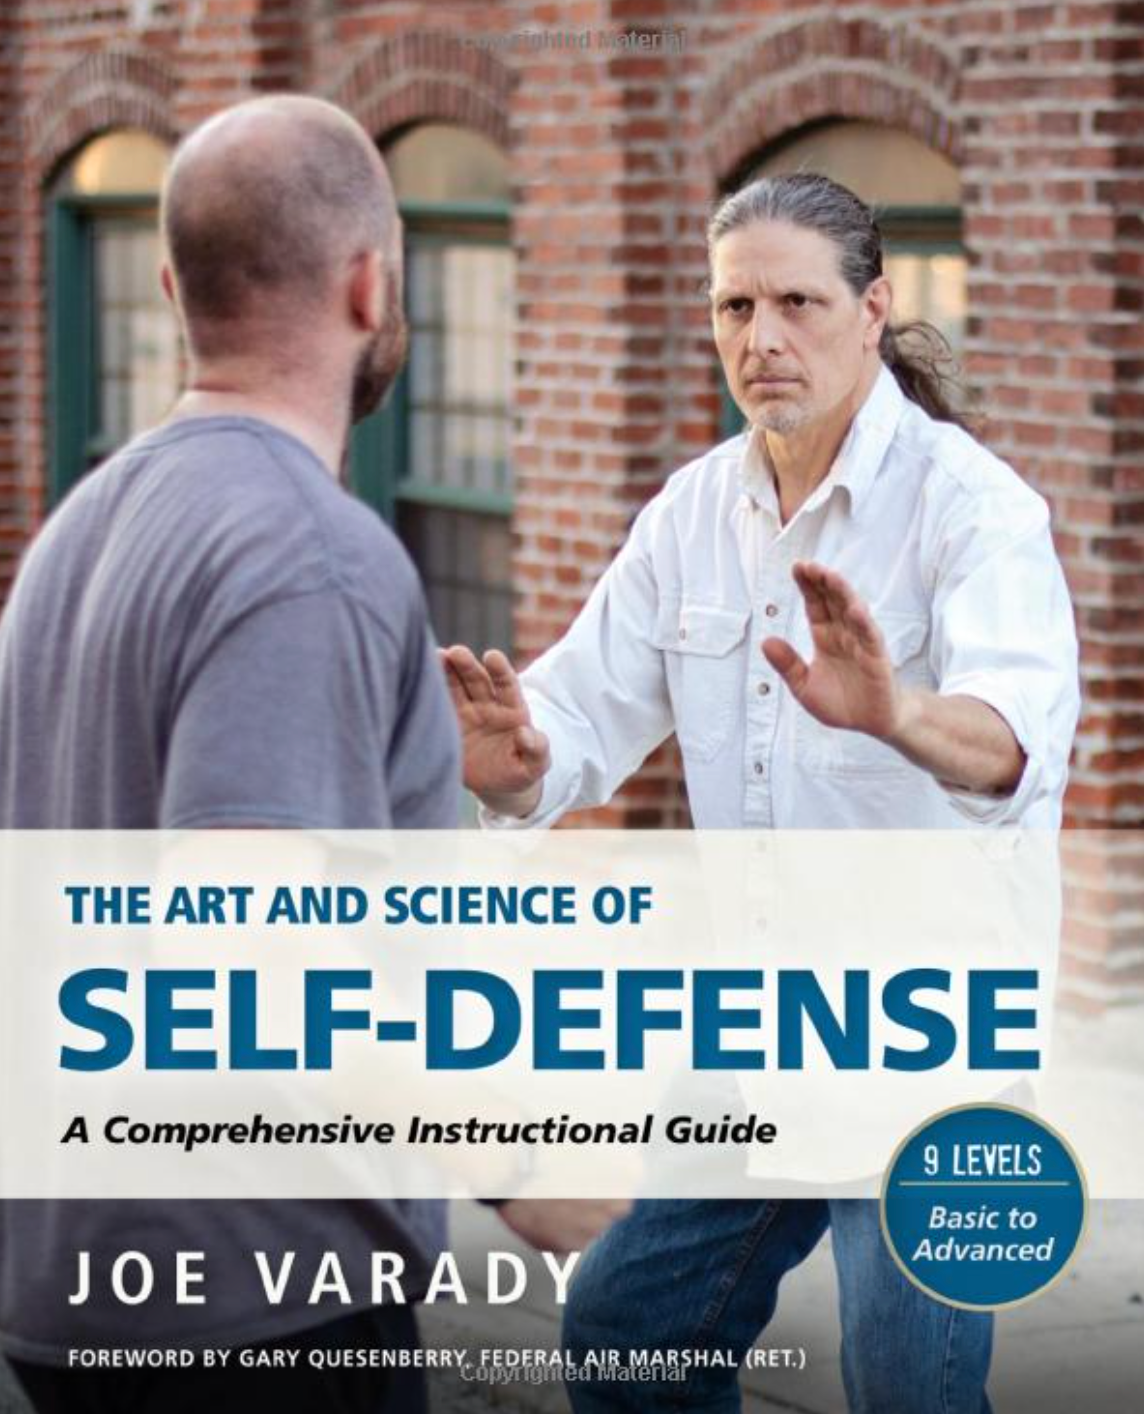 The Art and Science of Self Defense: A Comprehensive Instructional Guide Book by Joe Varady